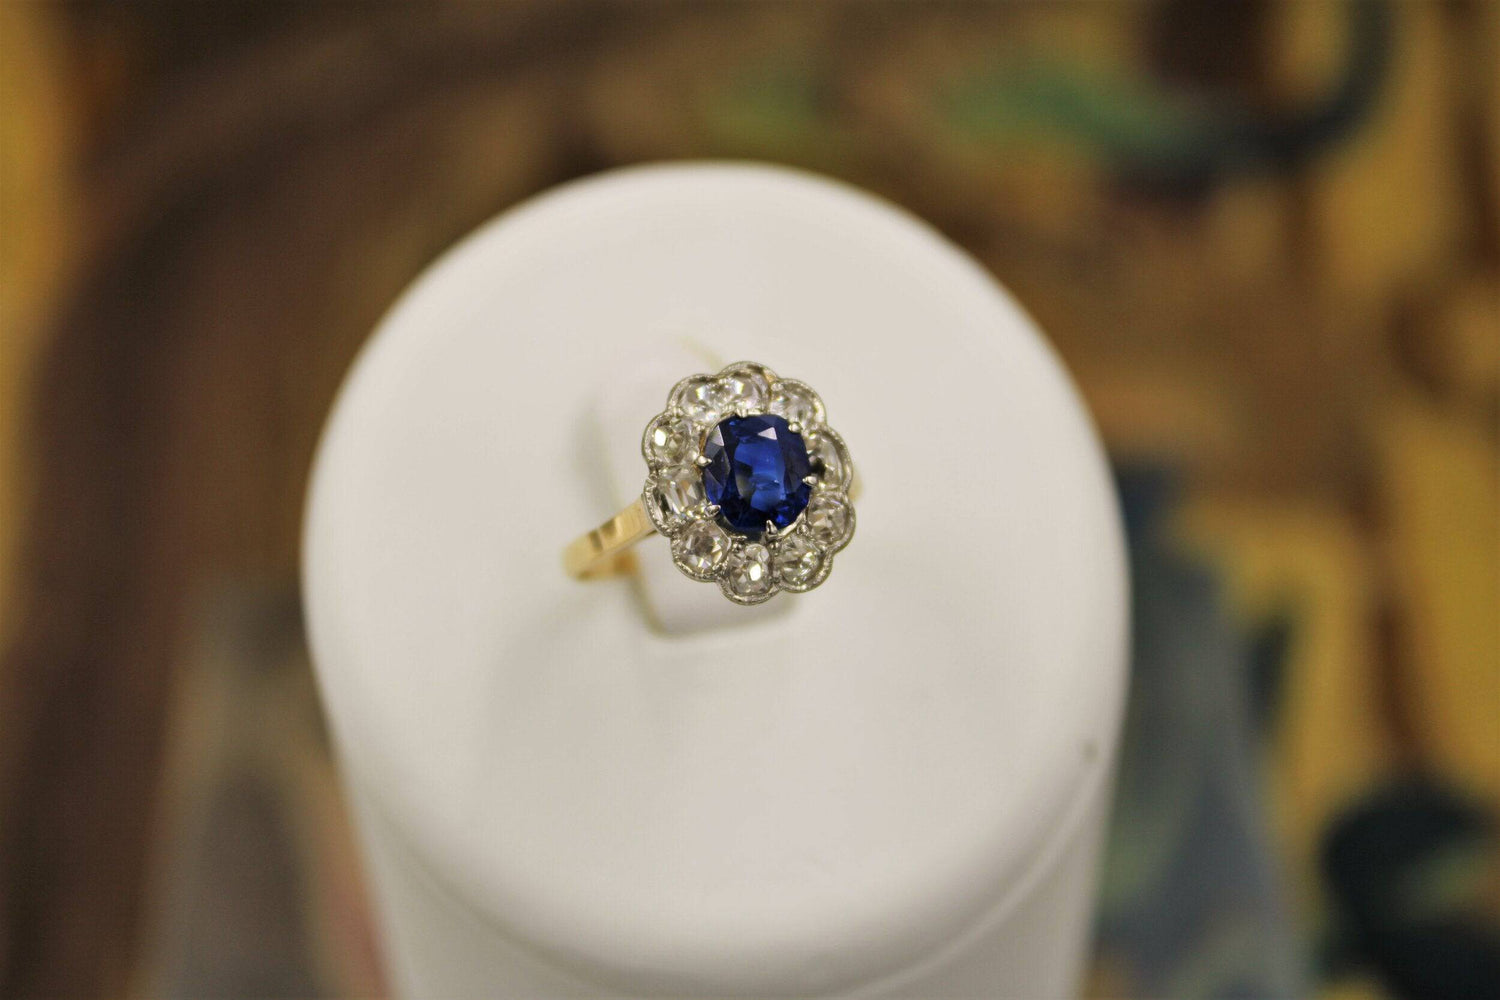 A very fine Sapphire and Diamond Cluster Ring set in 18ct Yellow Gold & Platinum, Circa 1935 - Robin Haydock Antiques